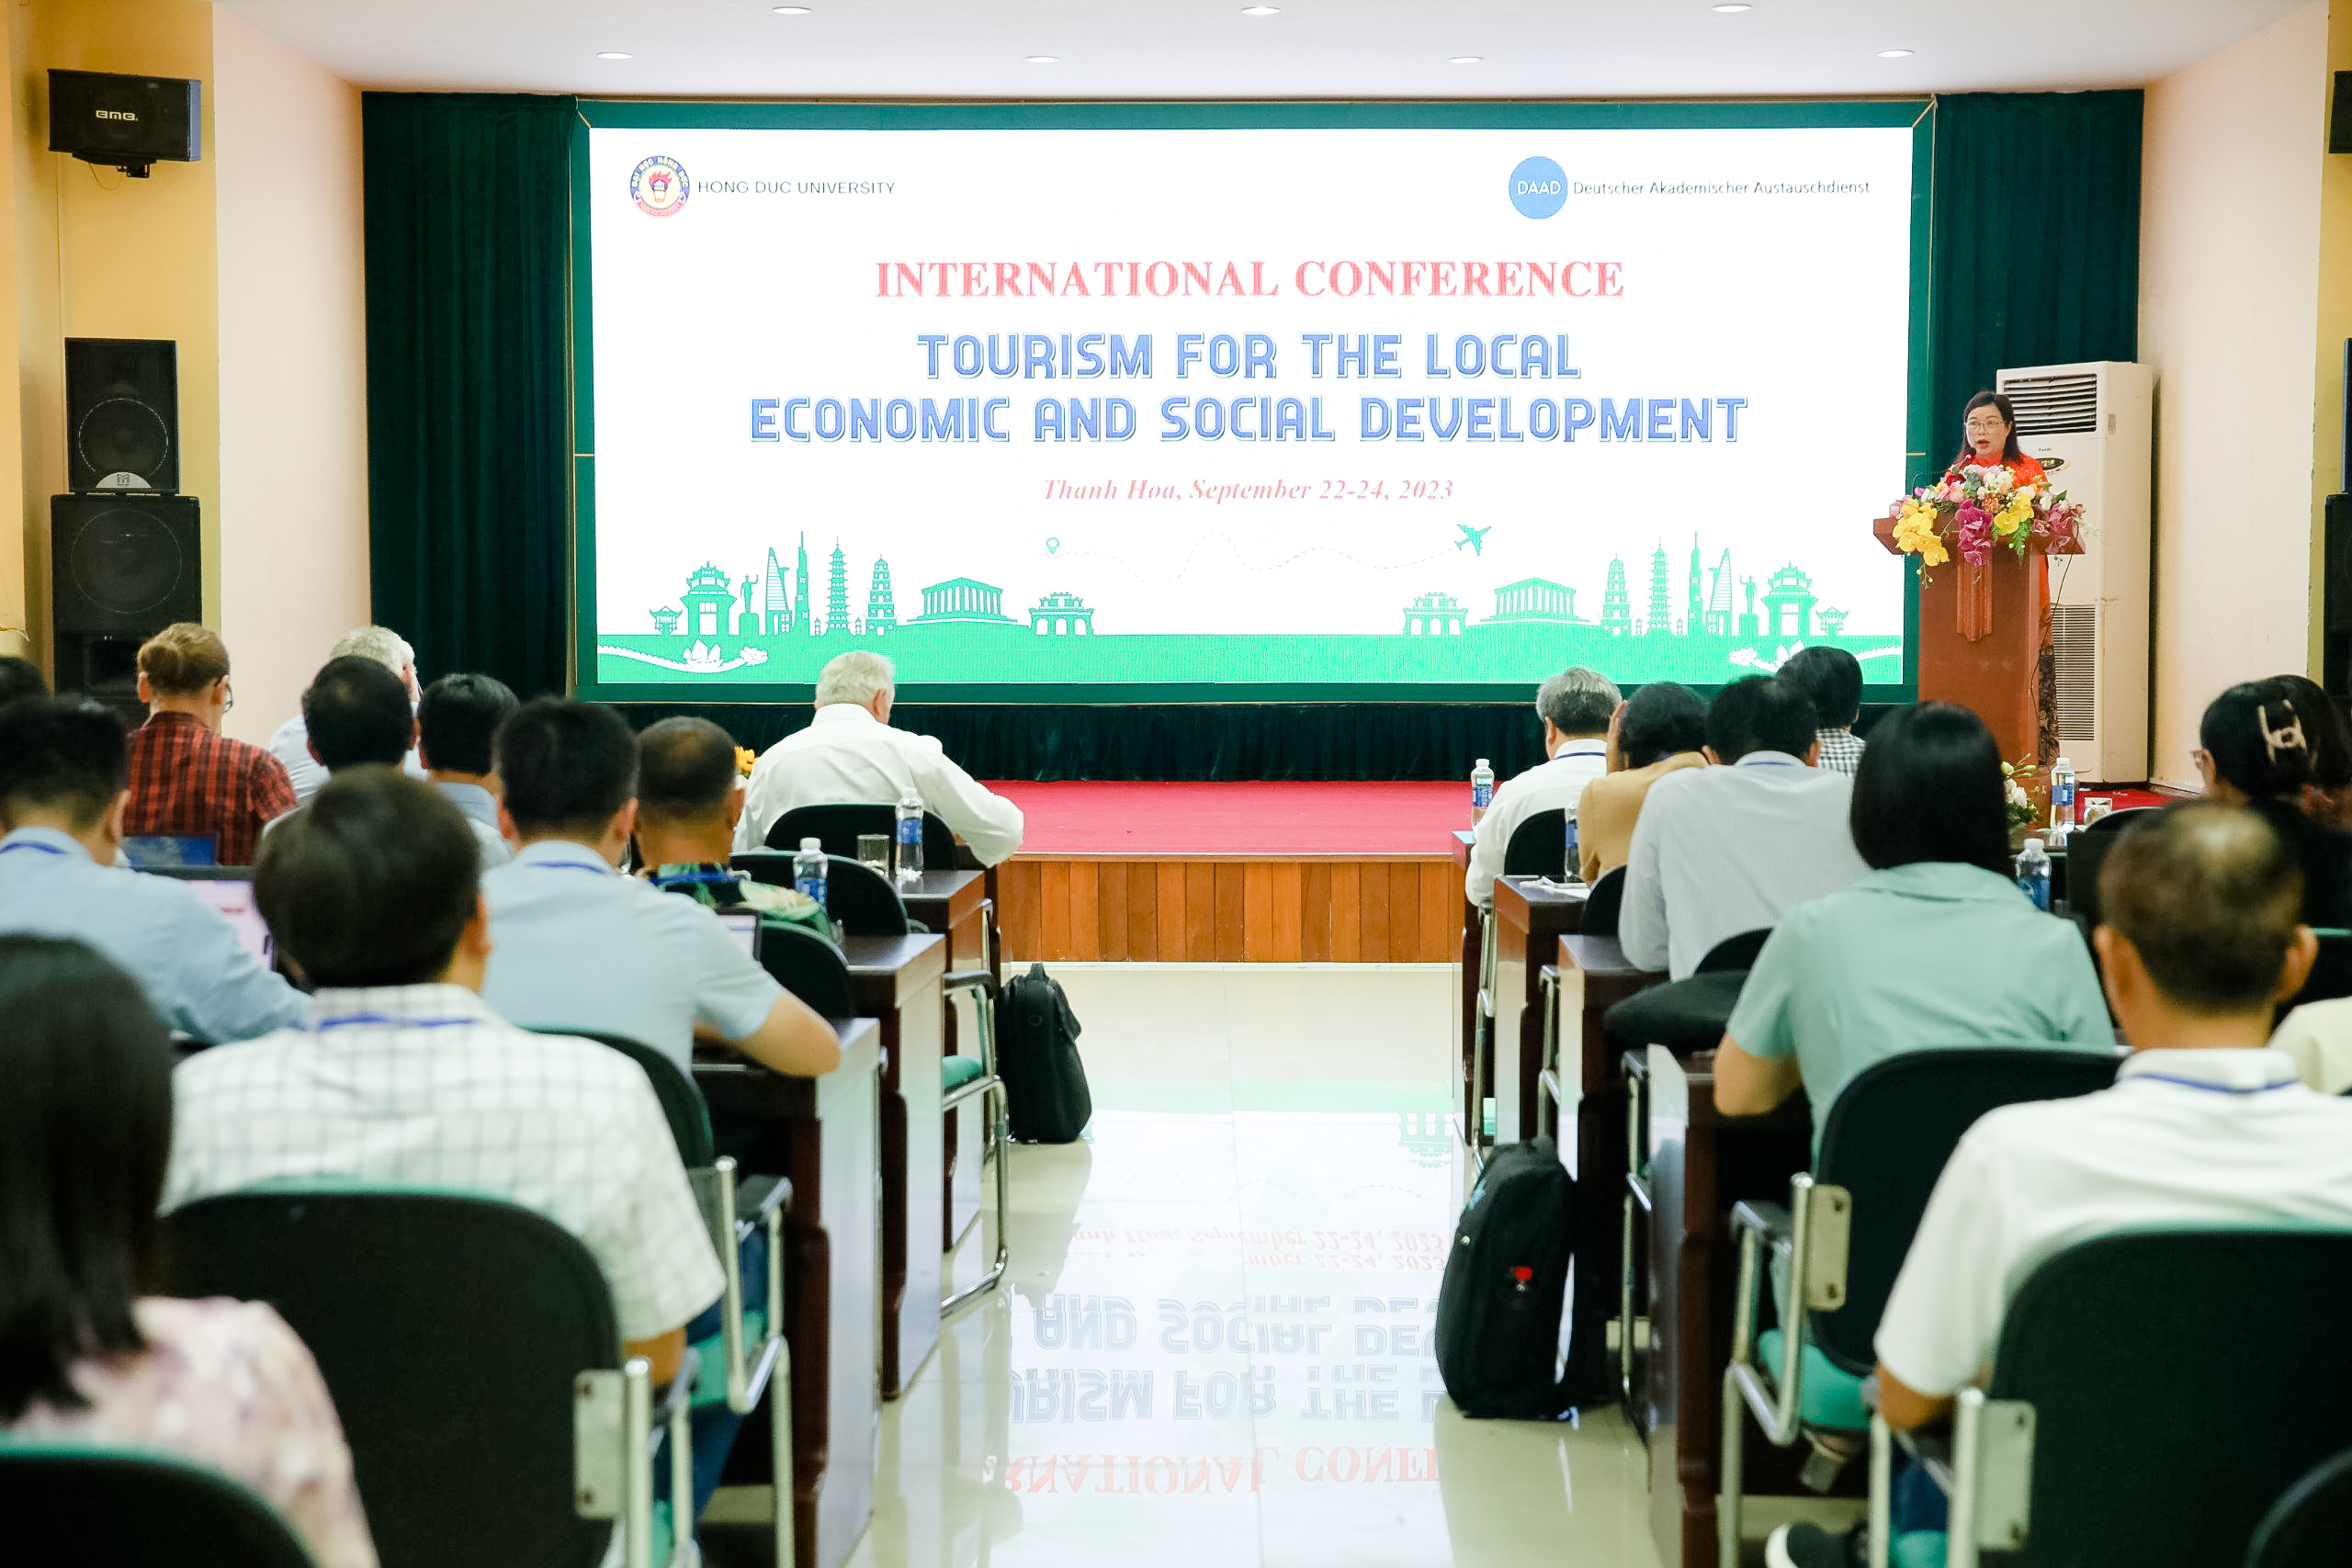 Hong Duc University in collaboration with the German Academic Exchange Service (DAAD) organized an international conference: Tourism development associated with local socio-economic development